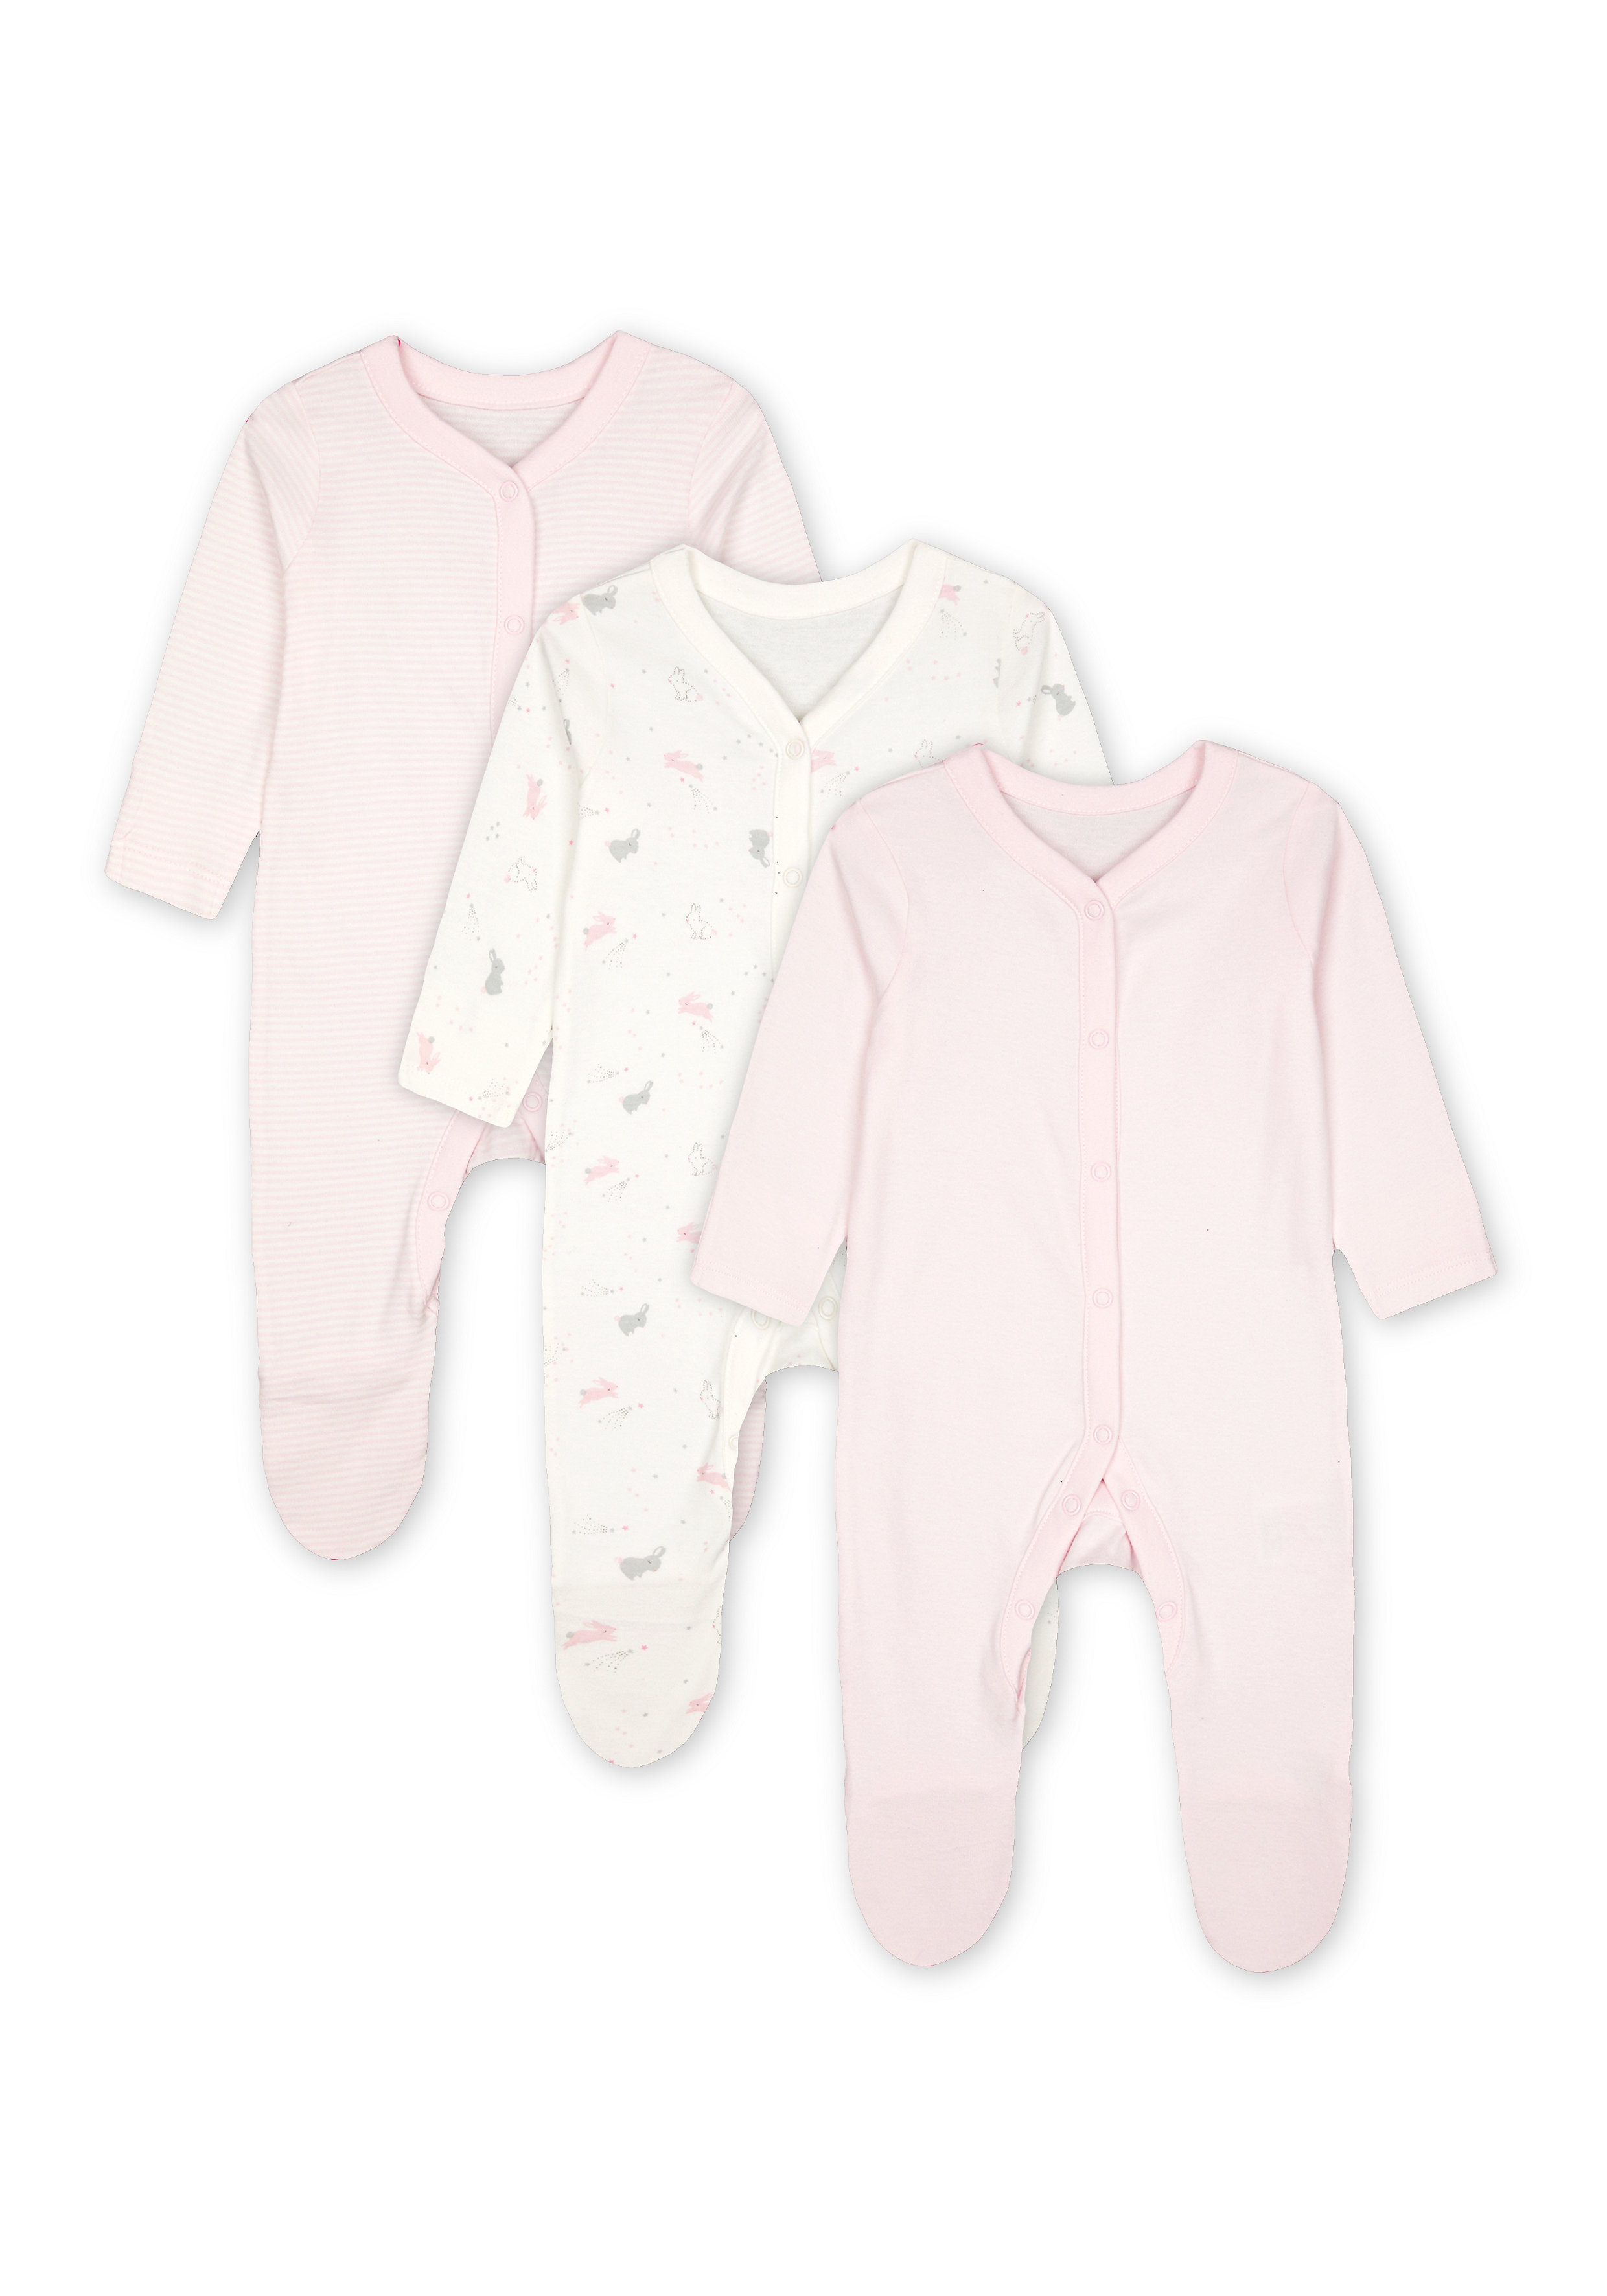 Mothercare | Girls Full Sleeves Sleepsuit Striped And Bunny Print - Pack Of 3 - Pink